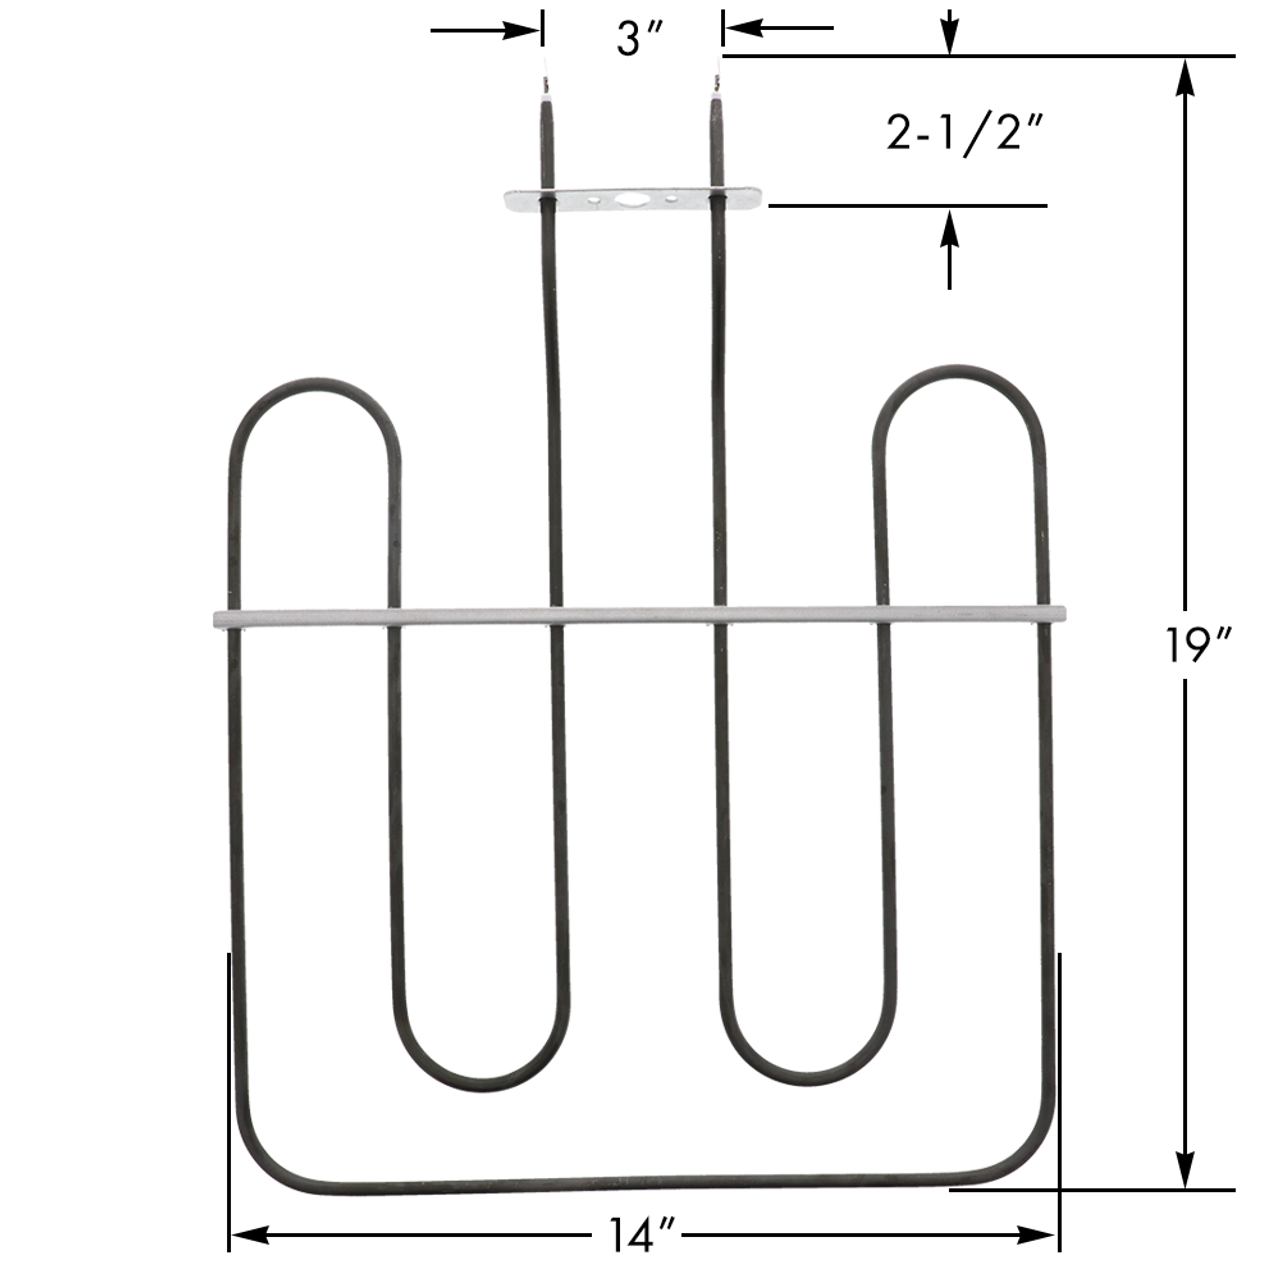 LG Oven Replacement Bake Element